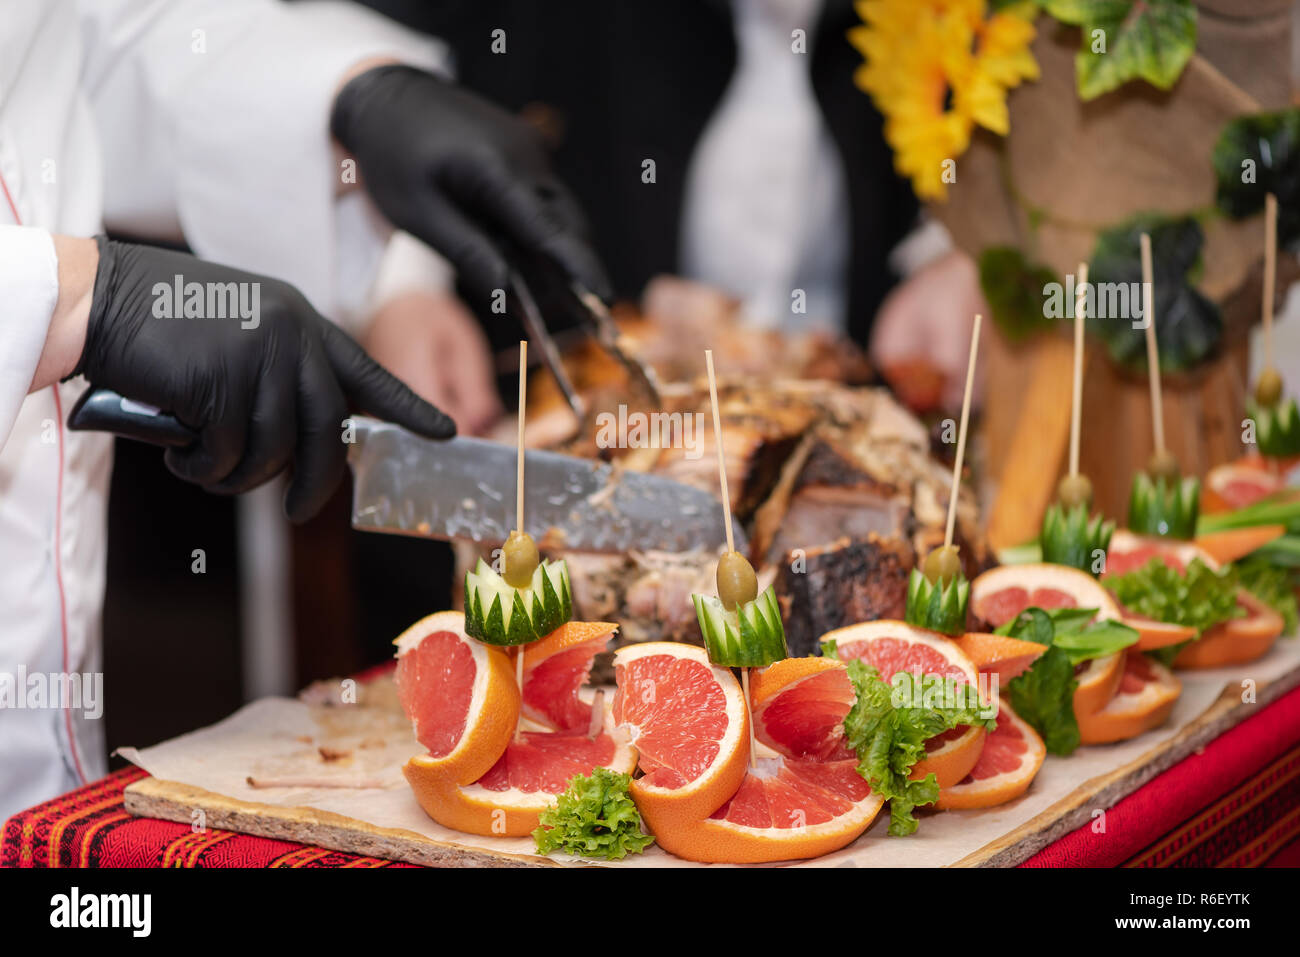 Chief cook cuts into pieces freshly cooked pork hip, process close up. Decorations of fruits and vegetables on the table, catering. Show at restaurant Stock Photo